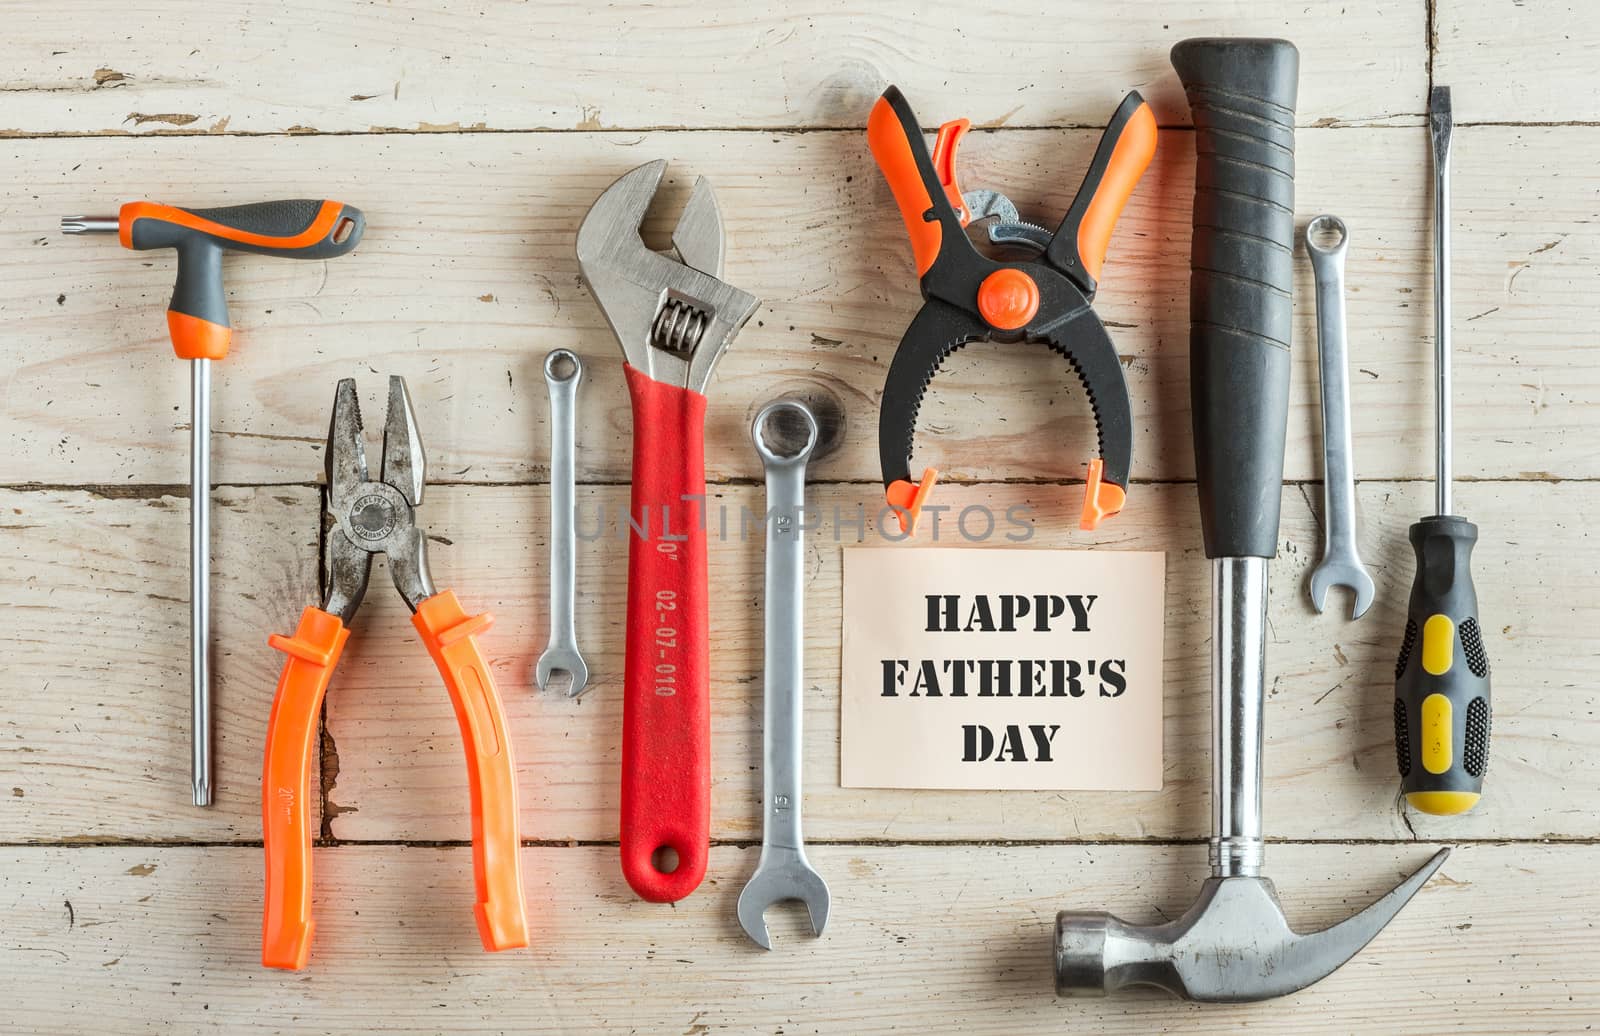 Greeting Card to Happy Father's Day, concept, set of different tools: a hammer, pliers, wrench, screwdriver, various spanners, clamp on a wooden background and tablet for an inscription, 